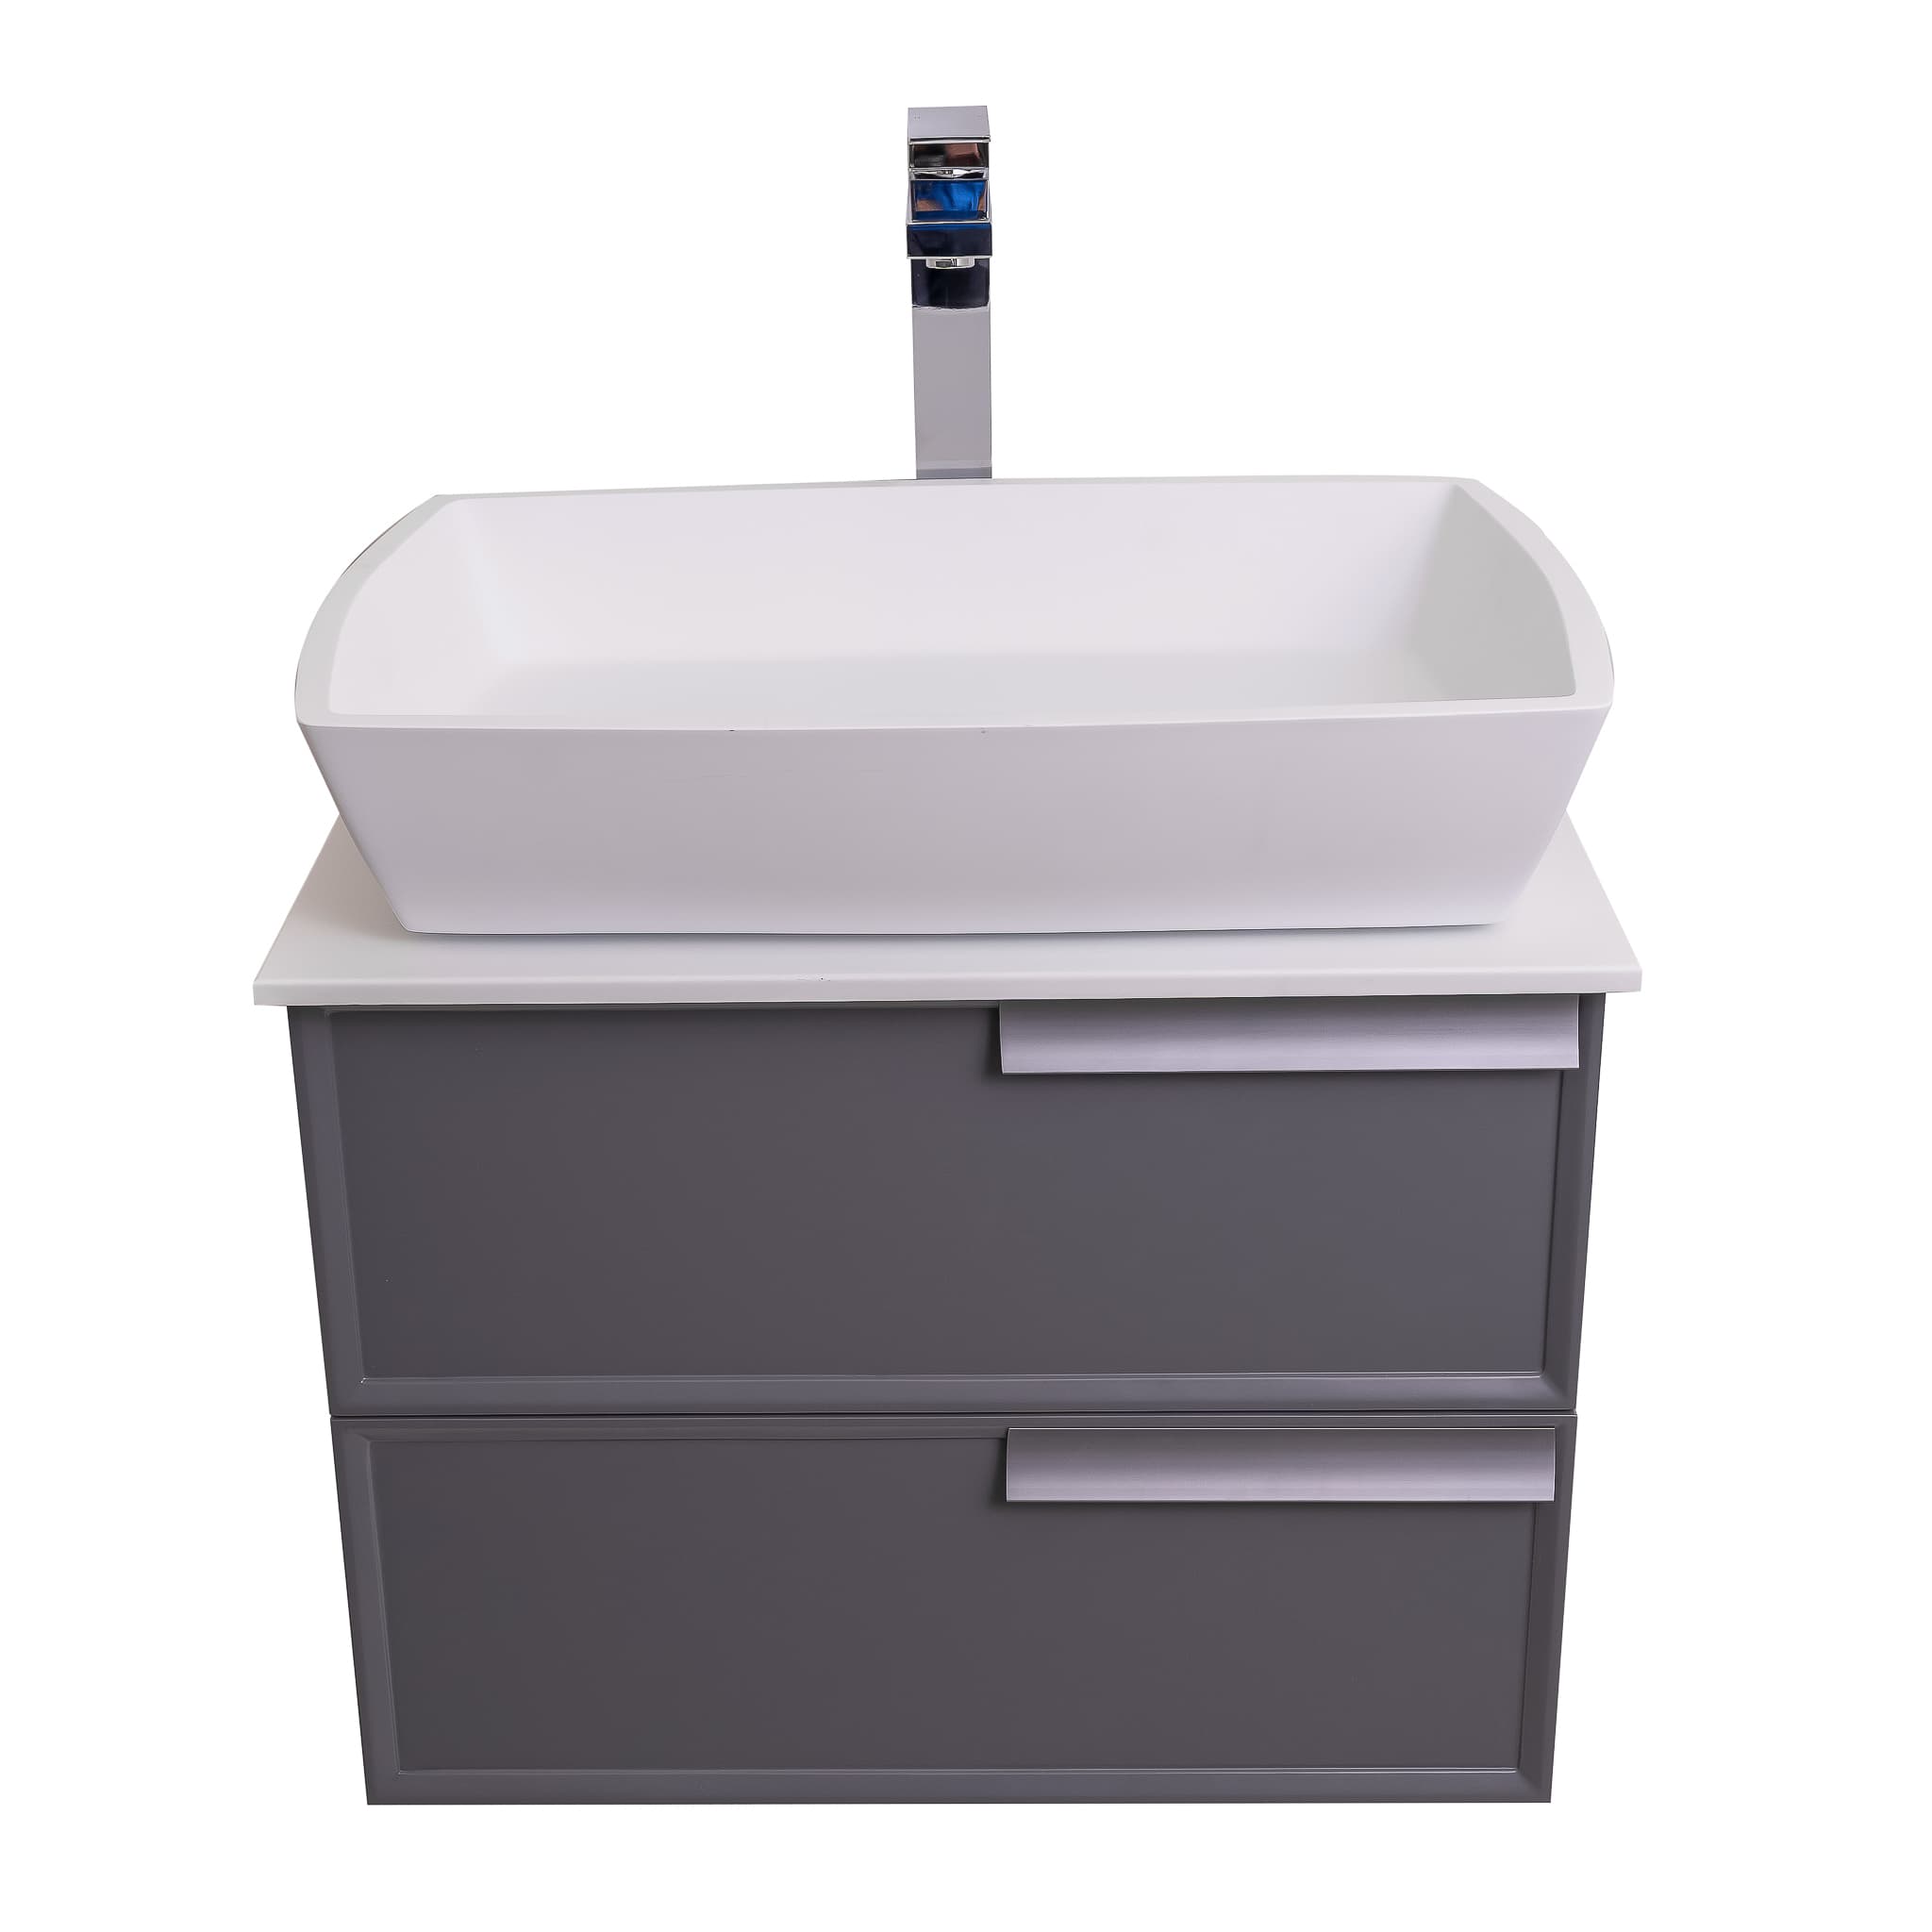 Garda 23.5 Matte Grey Cabinet, Solid Surface Flat White Counter and Square Solid Surface White Basin 1316, Wall Mounted Modern Vanity Set